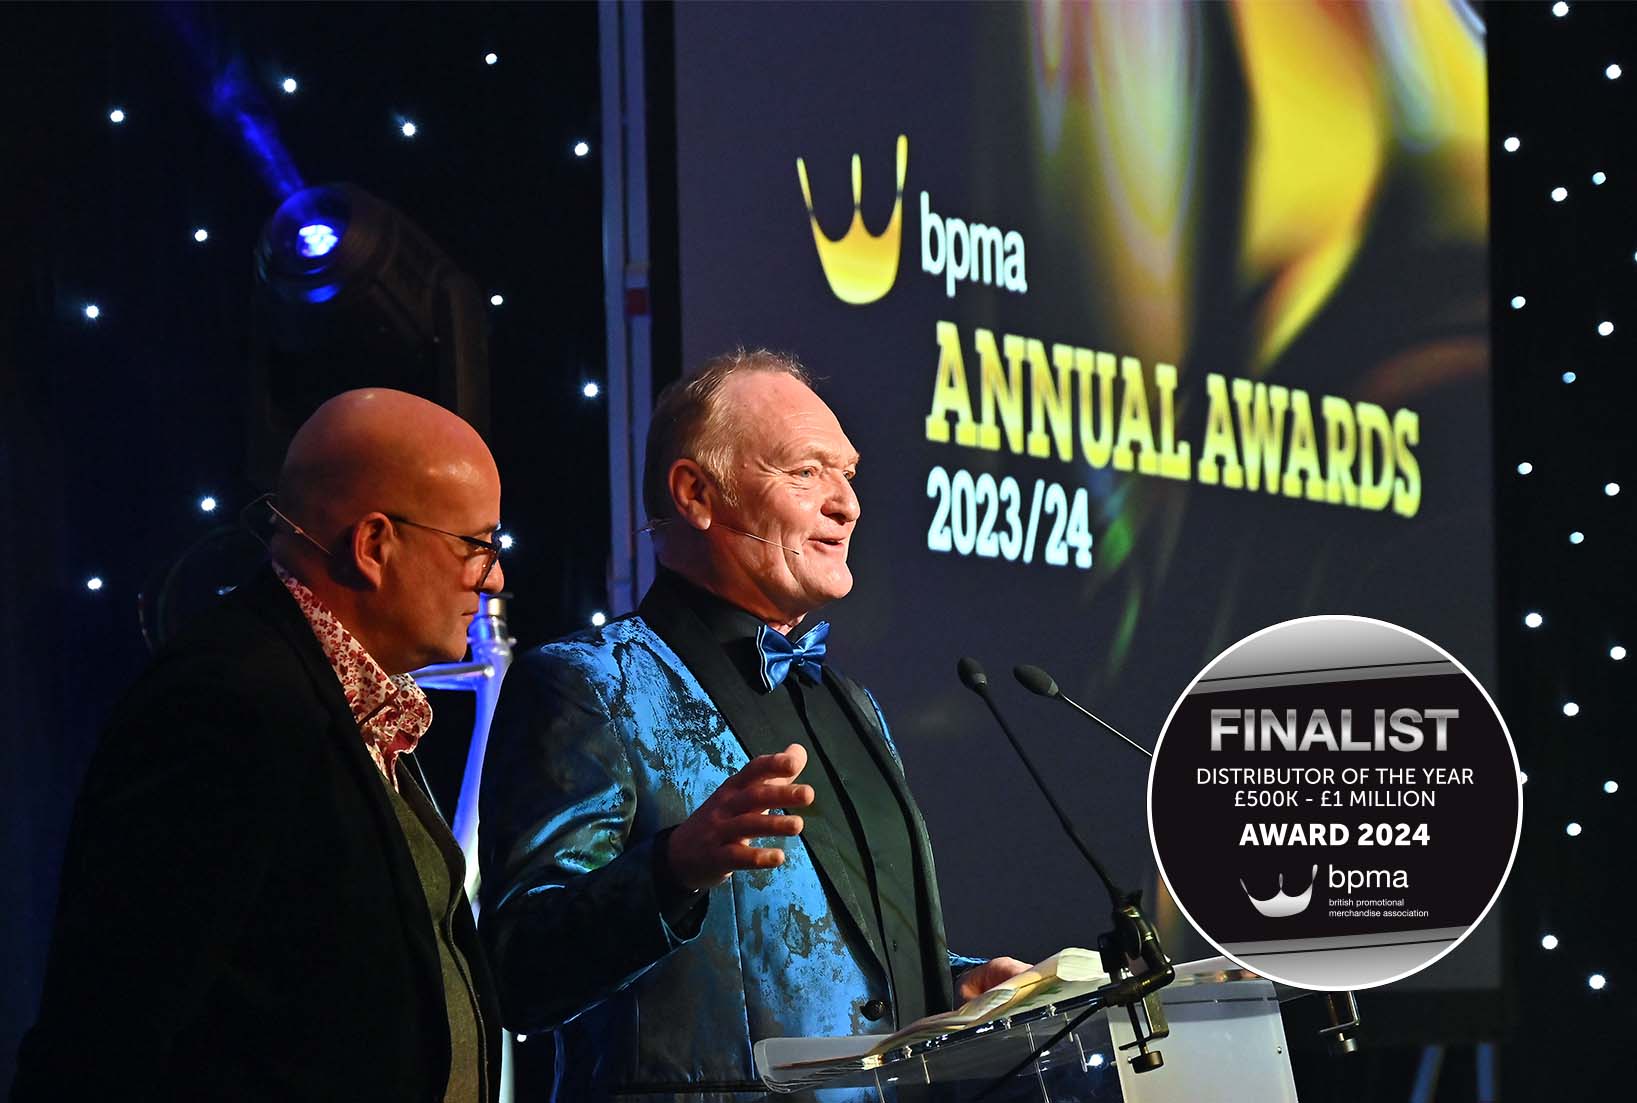 Recognition at the BPMA Awards 2024 